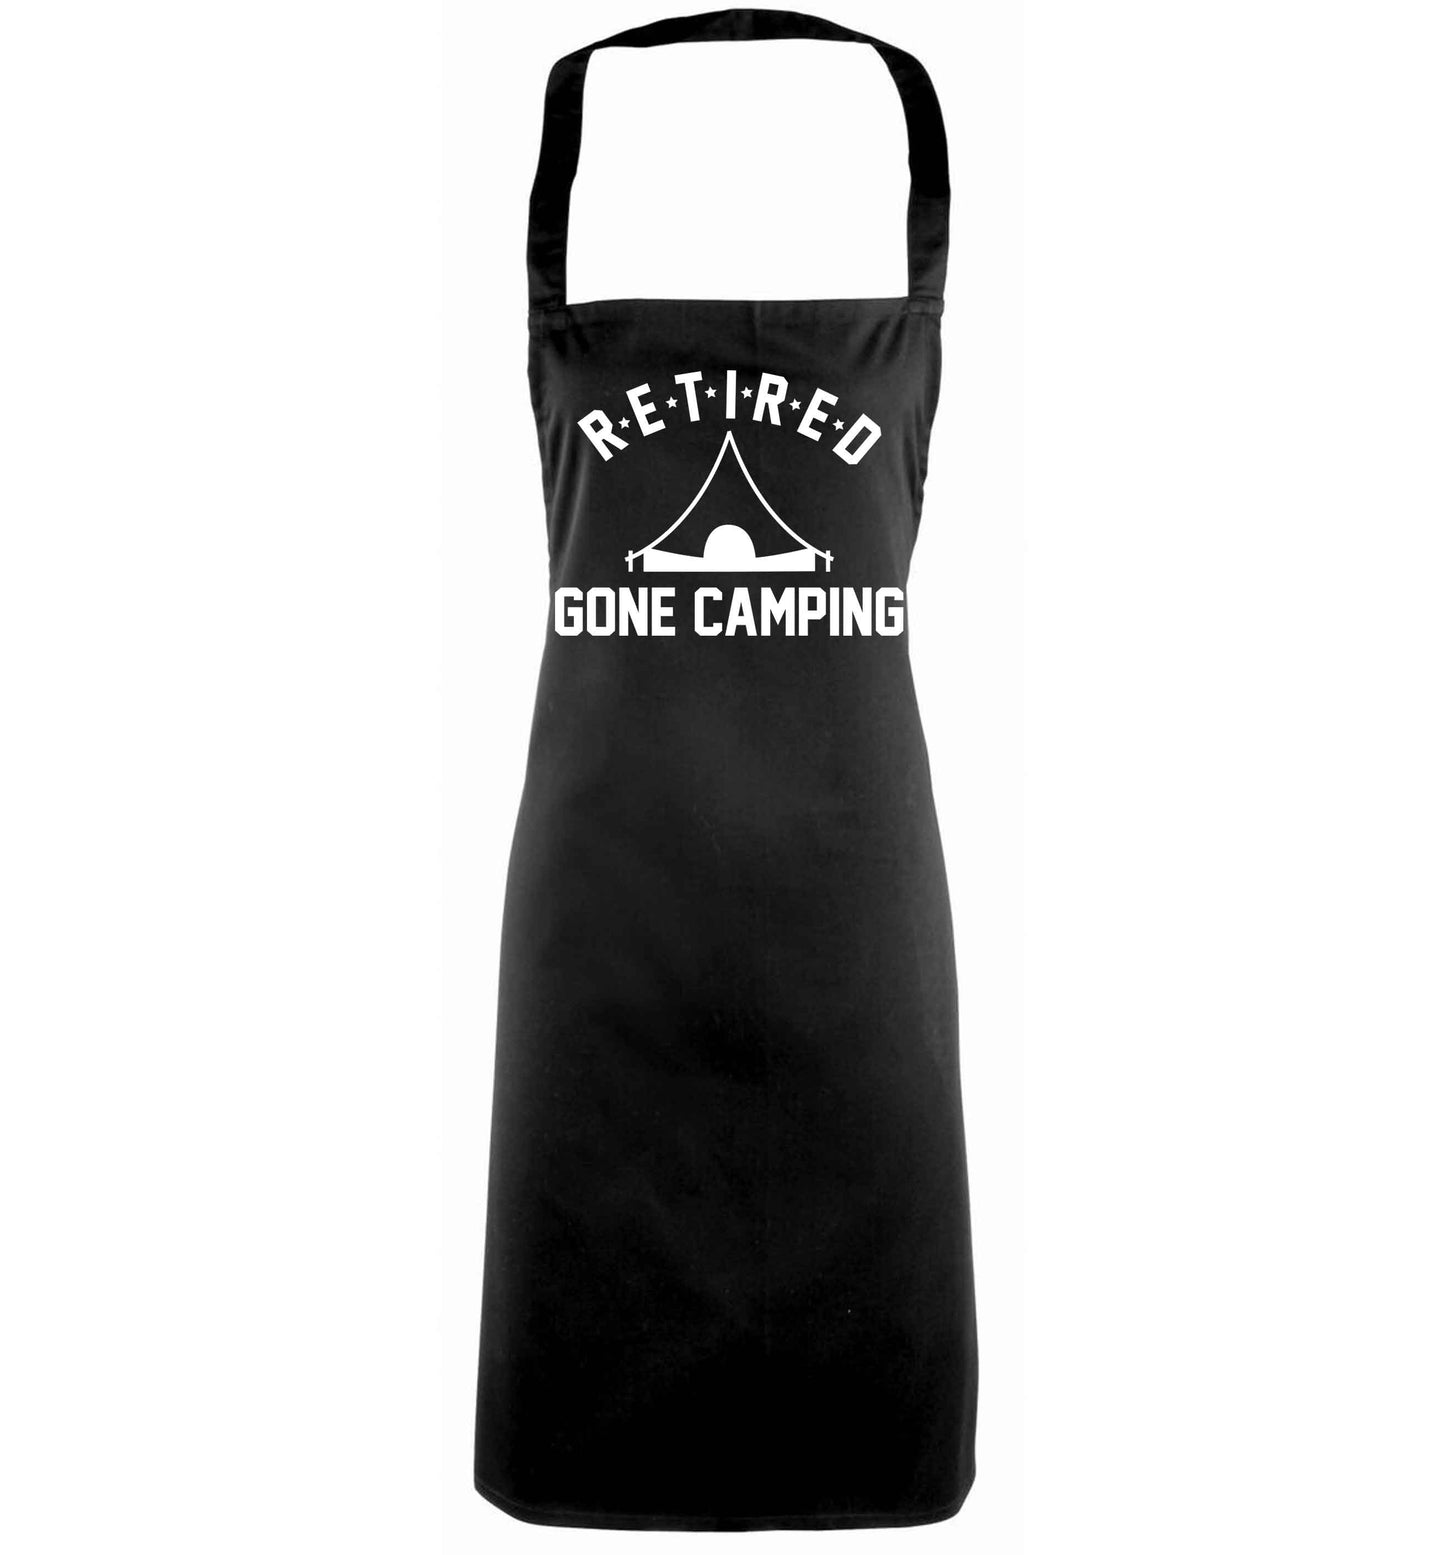 Retired gone camping black apron